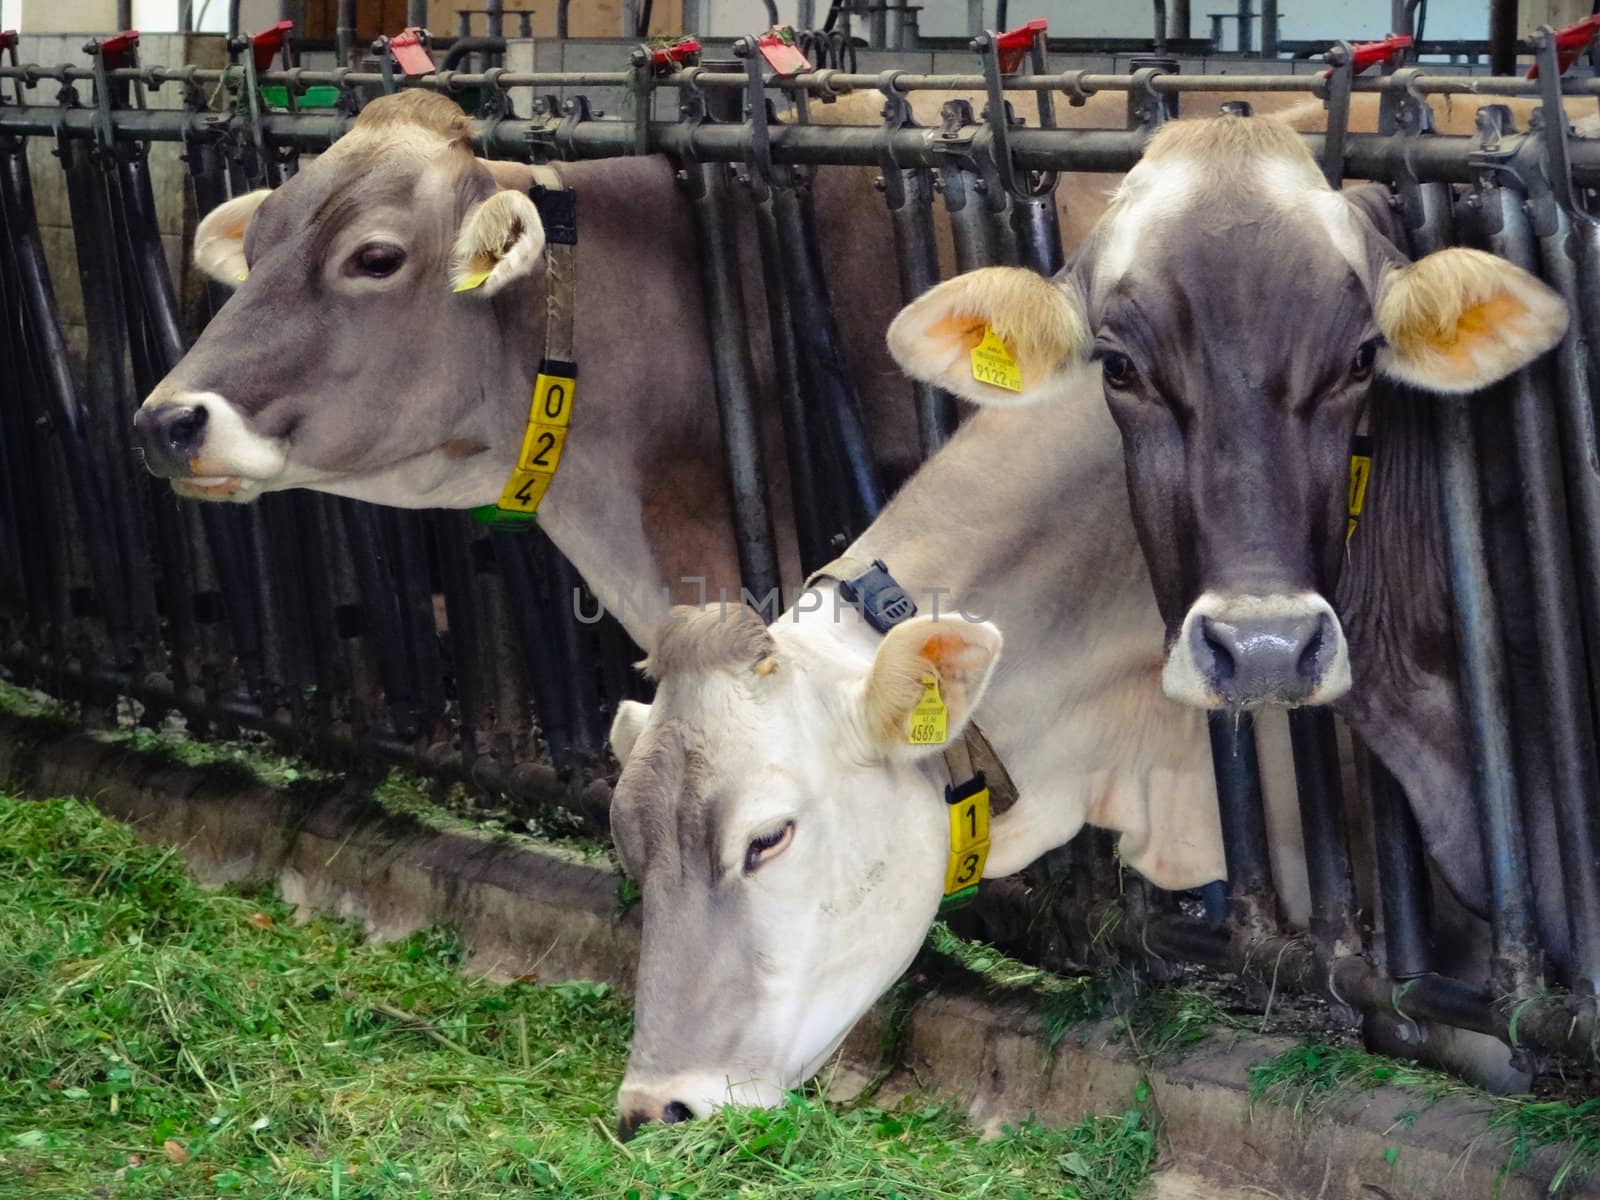 Three grey cows, locked in a cowshed